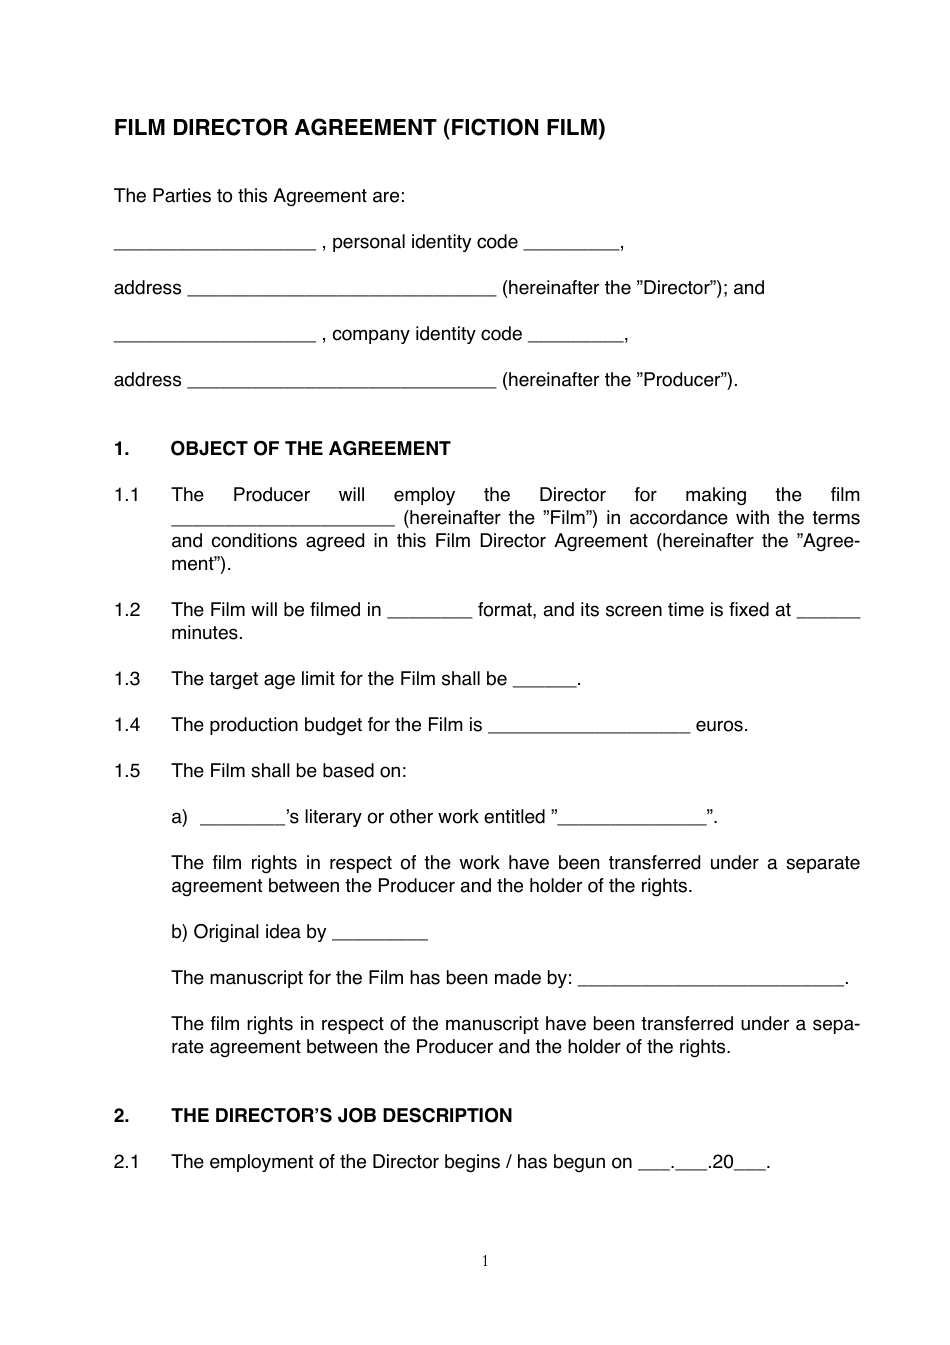 Film Director Agreement (Fiction Film) Template, Page 1